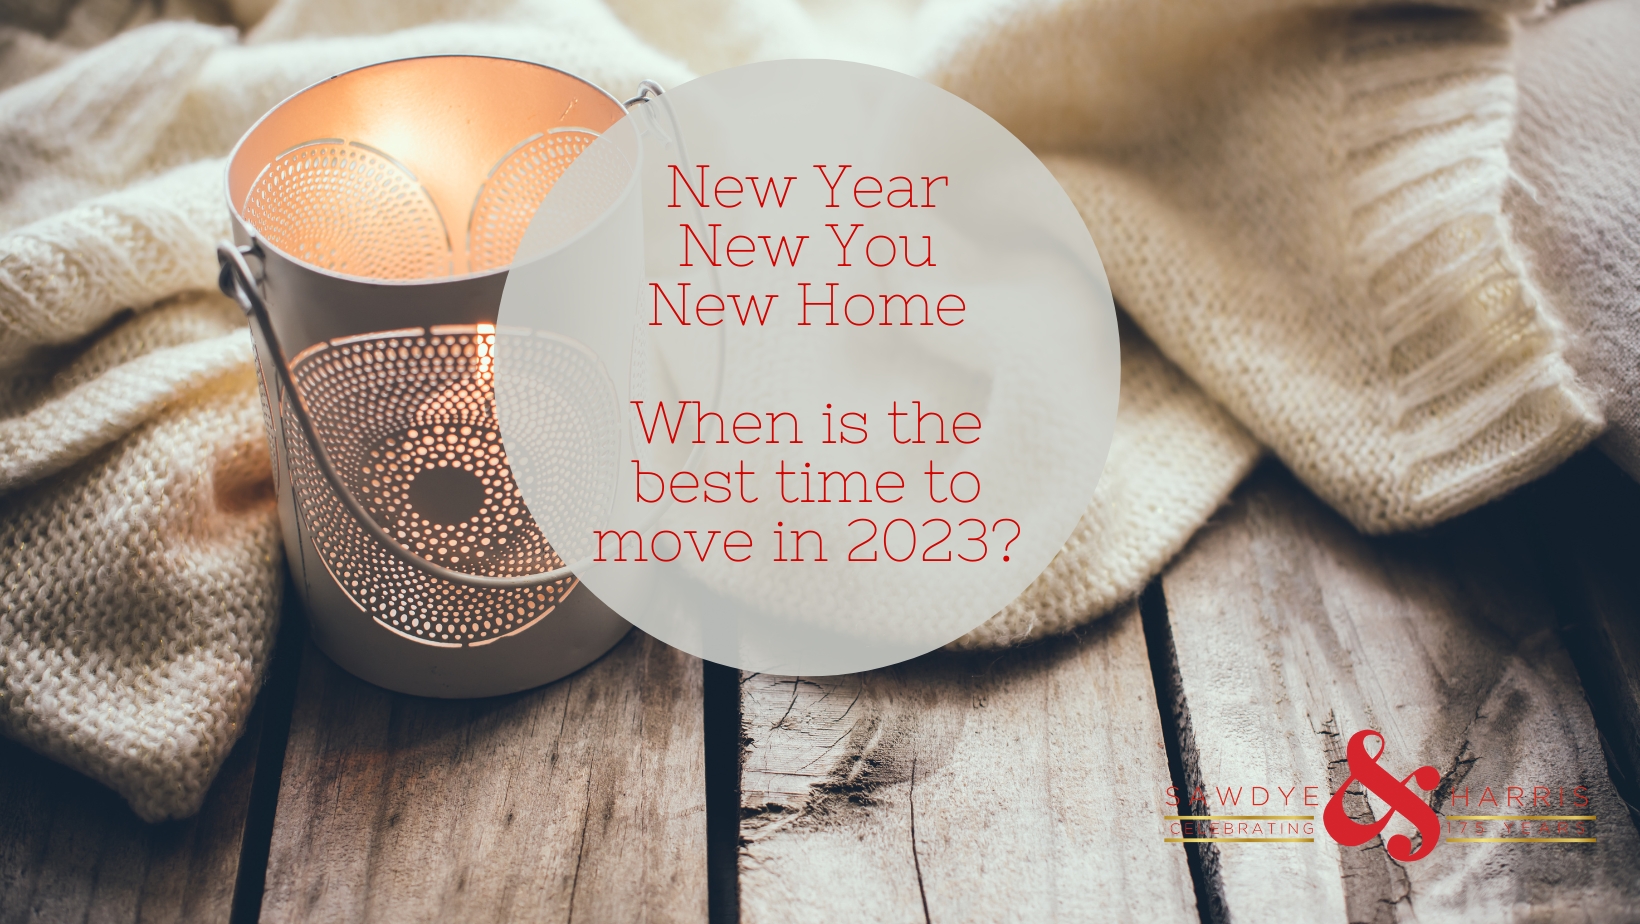 NEW YEAR, NEW YOU, NEW HOME